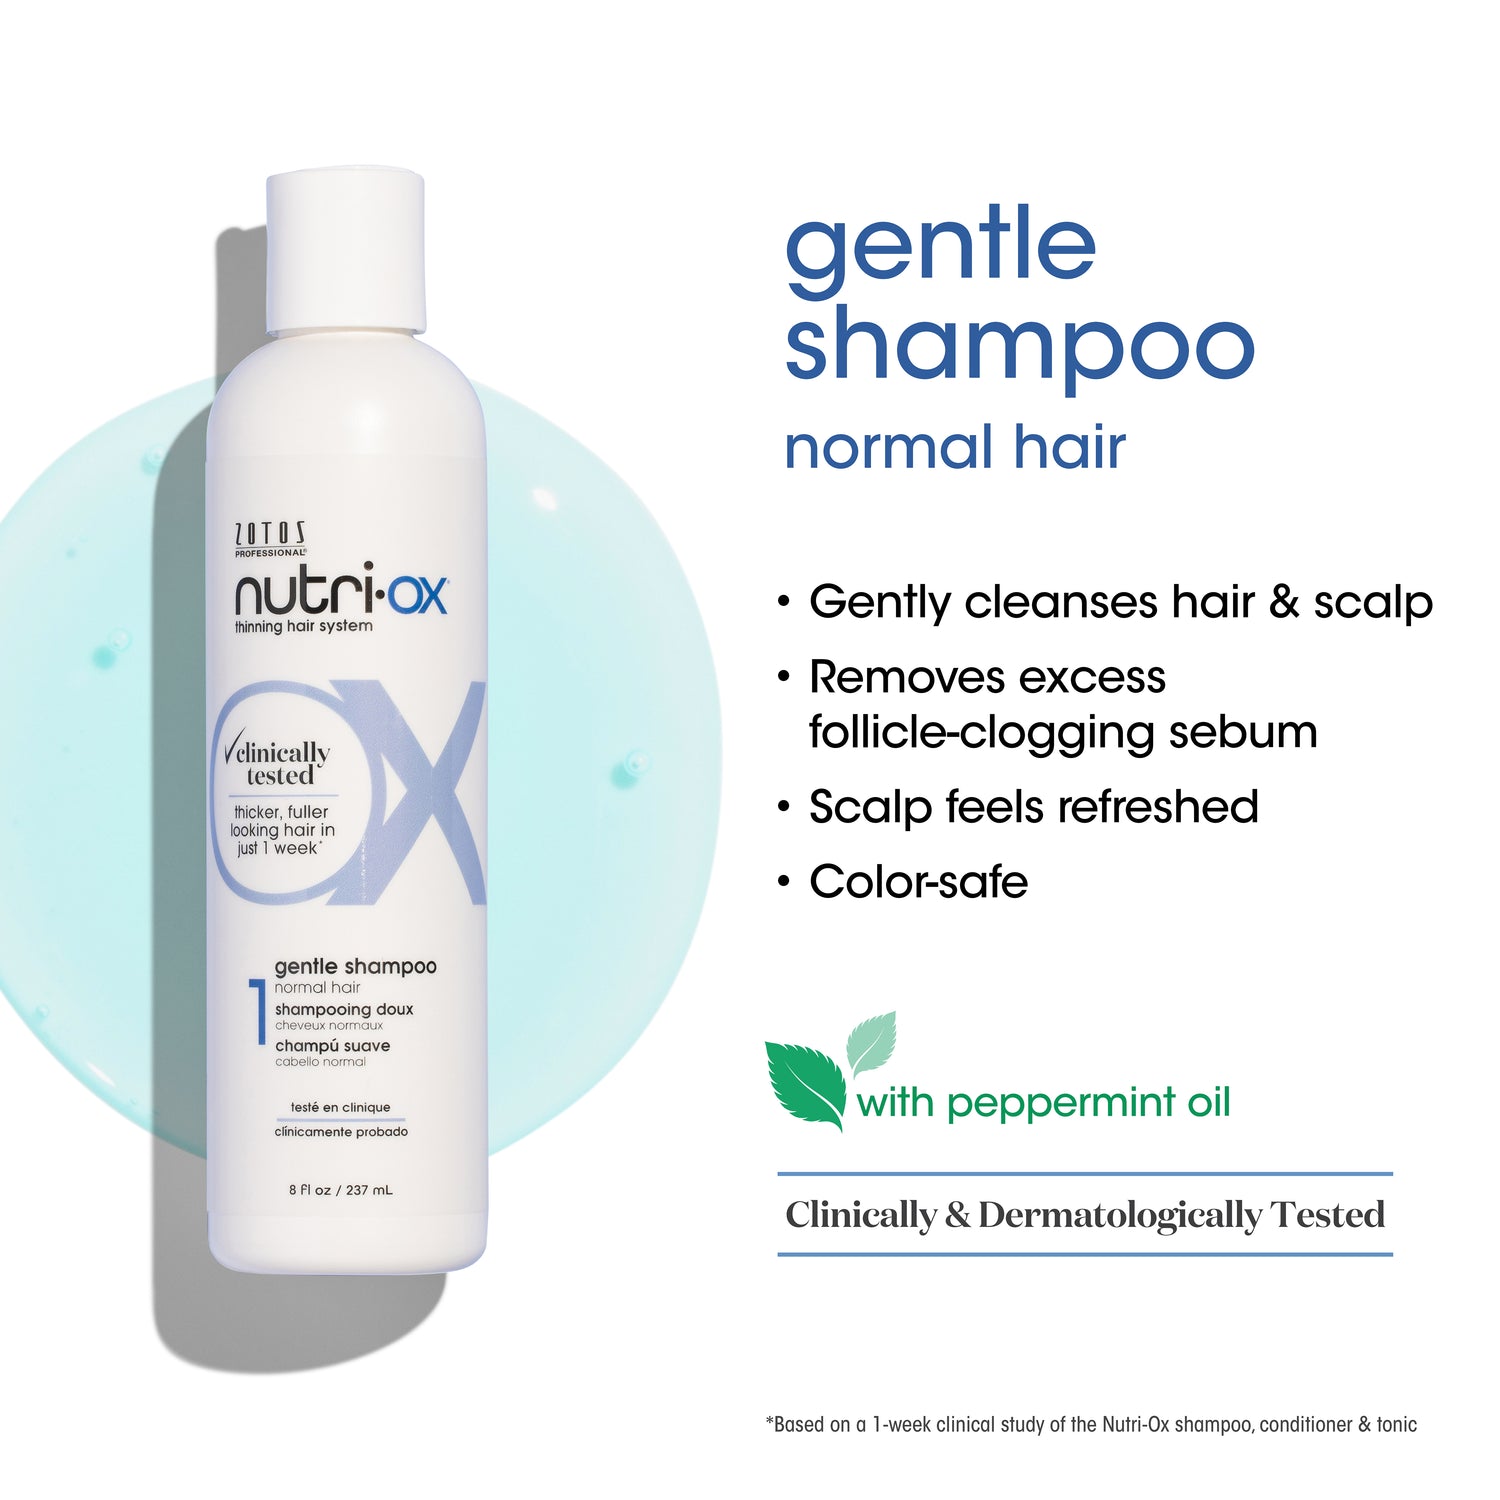 Gentle shampoo for normal hair gently cleanses hair and scalp, removes excess follicle-clogging sebum, scalp feels refreshed, color-safe.